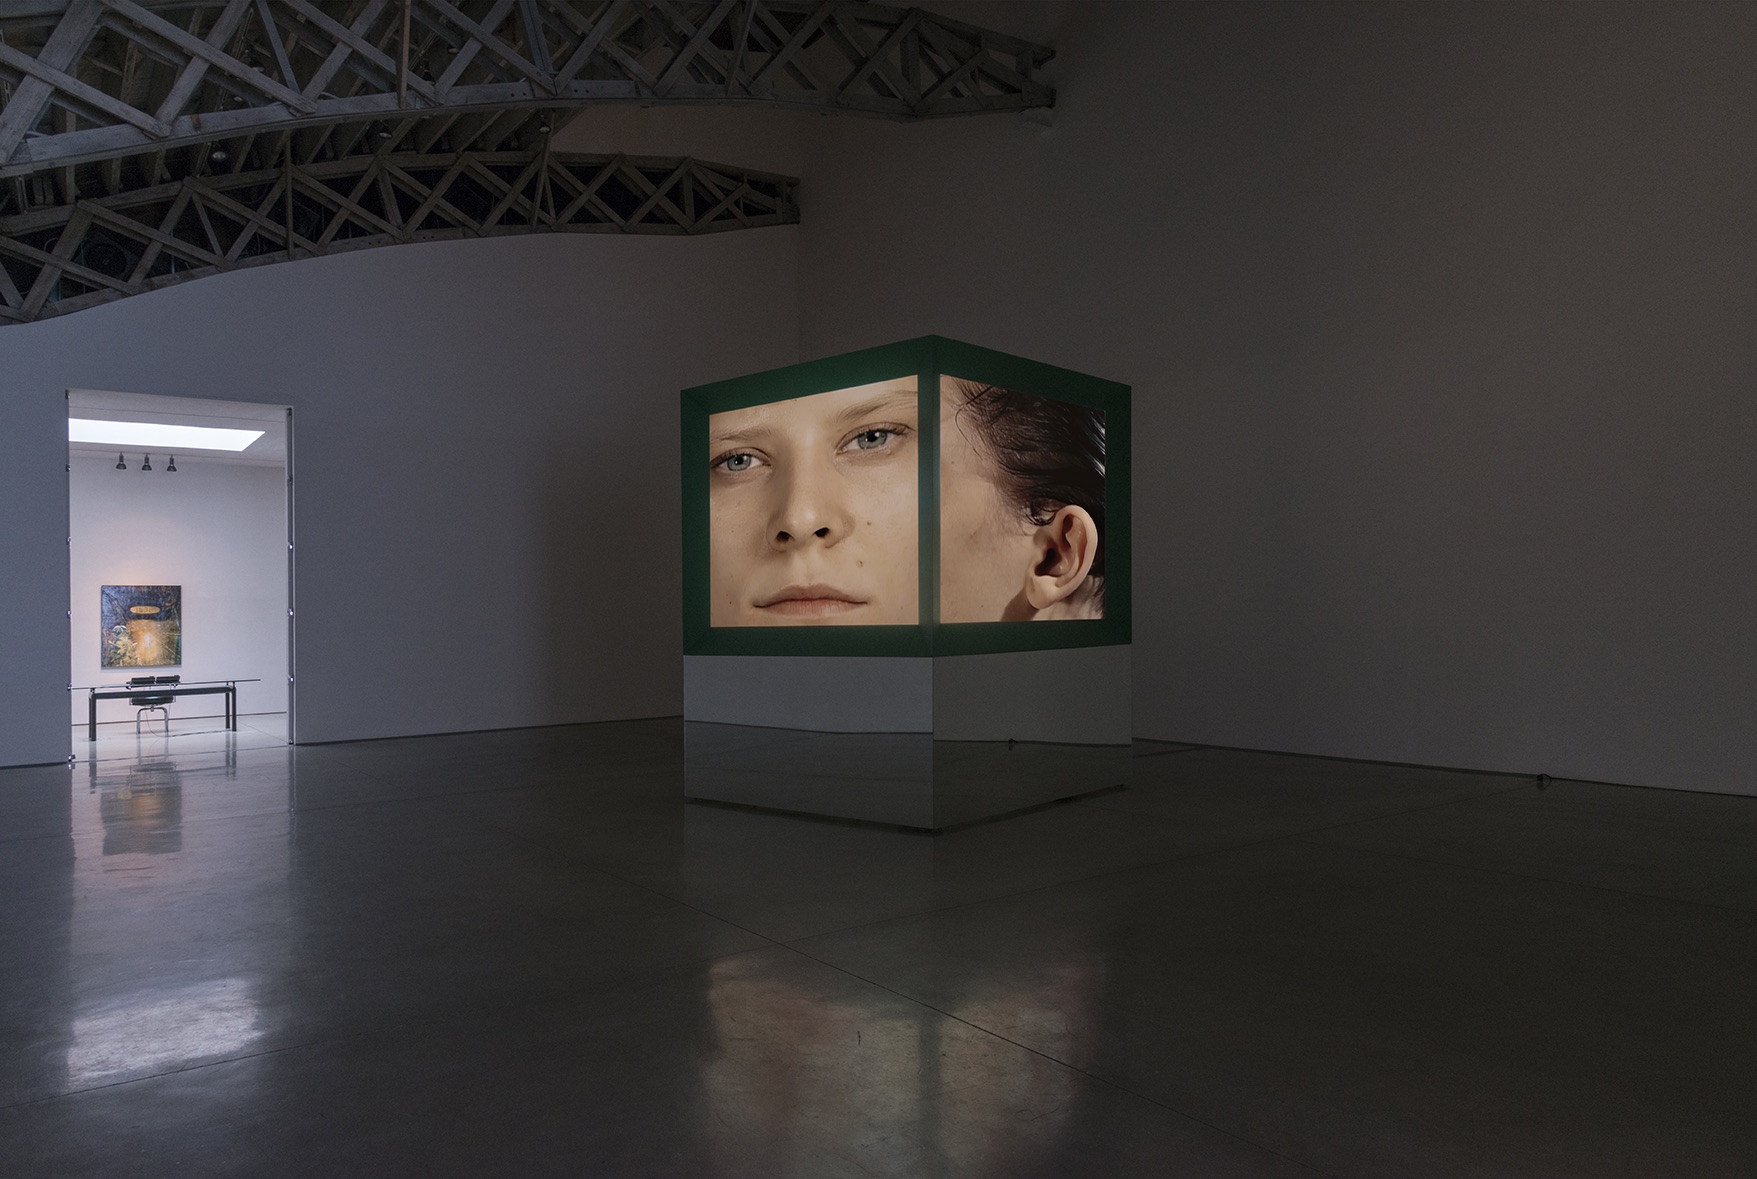 Judith Barry, Imagination, dead imagine, 1991. Five-channel video installation (color, sound; 15:00 minutes) with mirror, wood, and rear projection screens. Courtesy the artist and Mary Boone Gallery, New York. Photo by Adam Reich. Â© Judith Barry